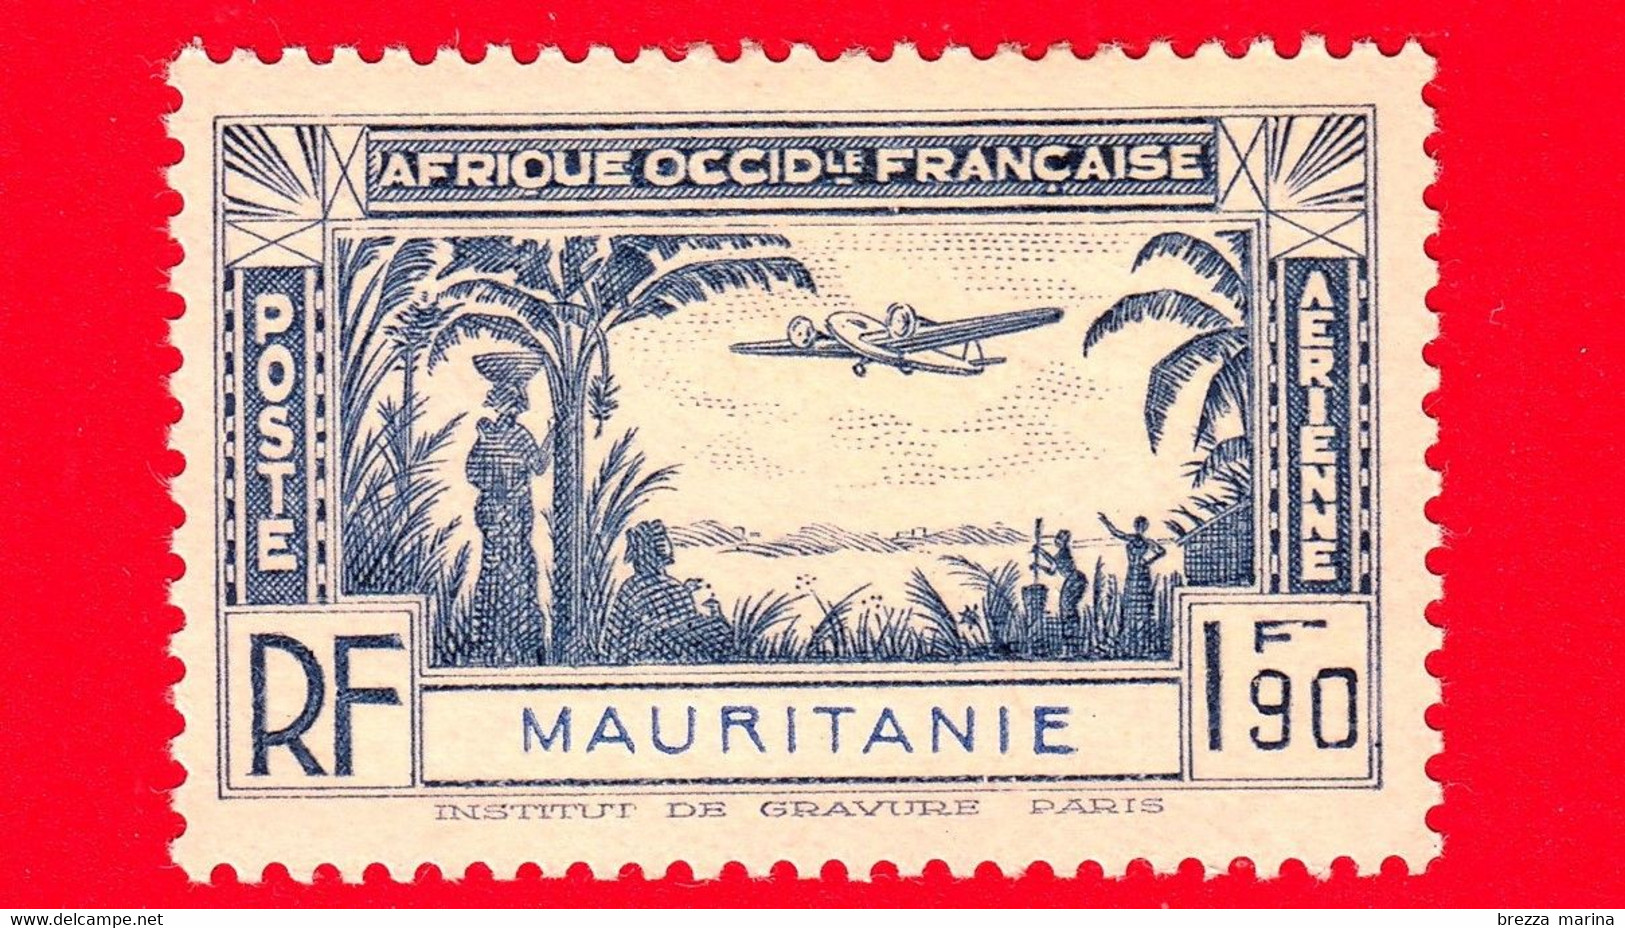 MAURITANIA - Africa Occidentale Francese - AOF - 1940 - Timbro Aereo Dell'Africa Occidentale Francese - 1.90 - P. Aerea - Used Stamps